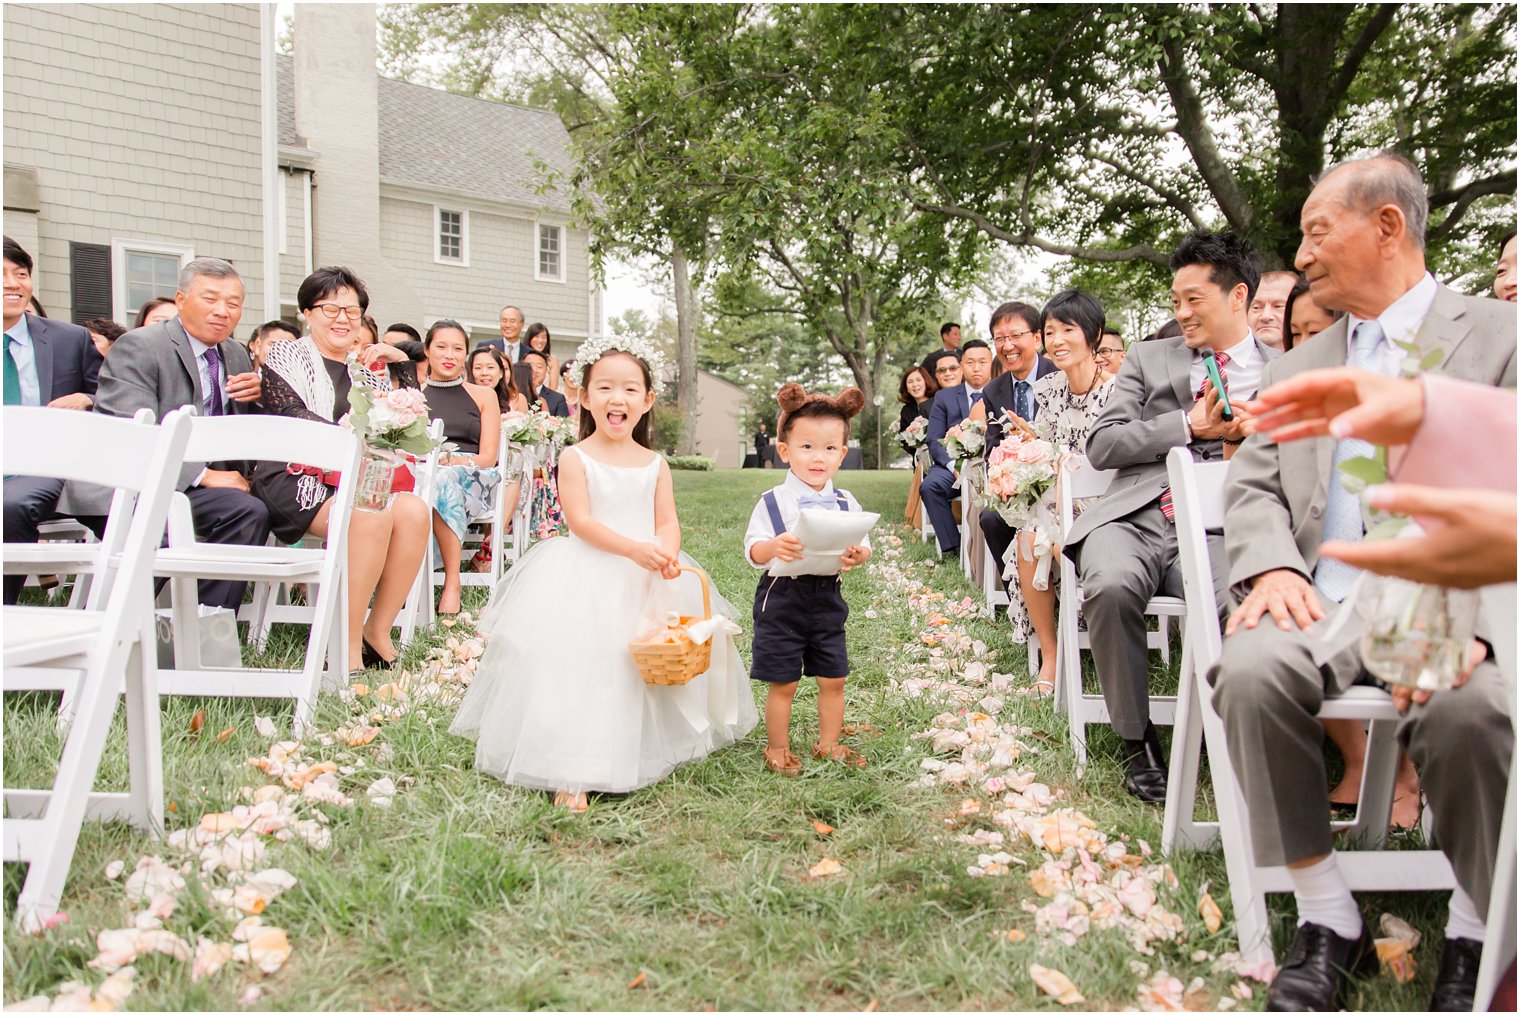 flower girl and ring bearer walk down aisle at Chauncey Hotel during NJ wedding photographed by Idalia Photography